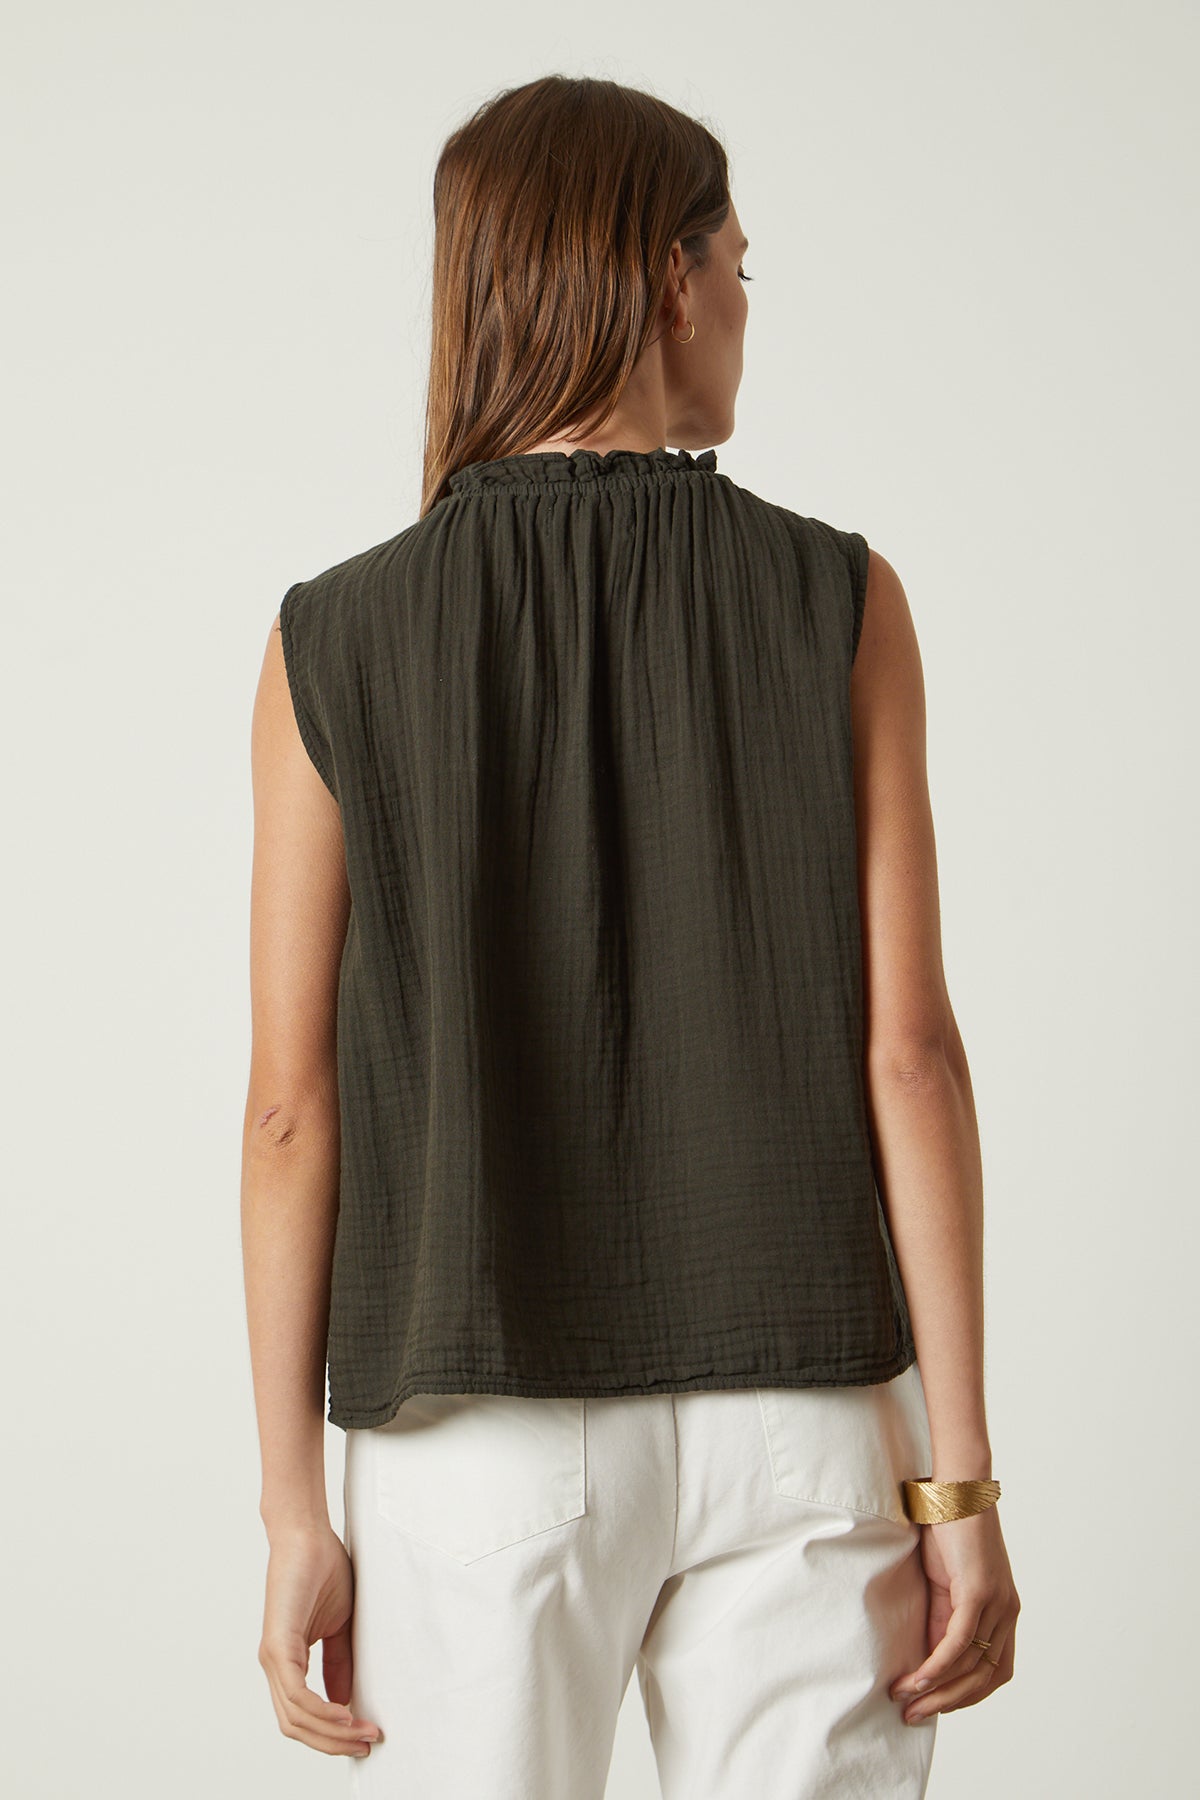 The back view of a woman wearing a Velvet by Graham & Spencer BIANCA COTTON GAUZE TANK TOP and white pants.-26079011012801